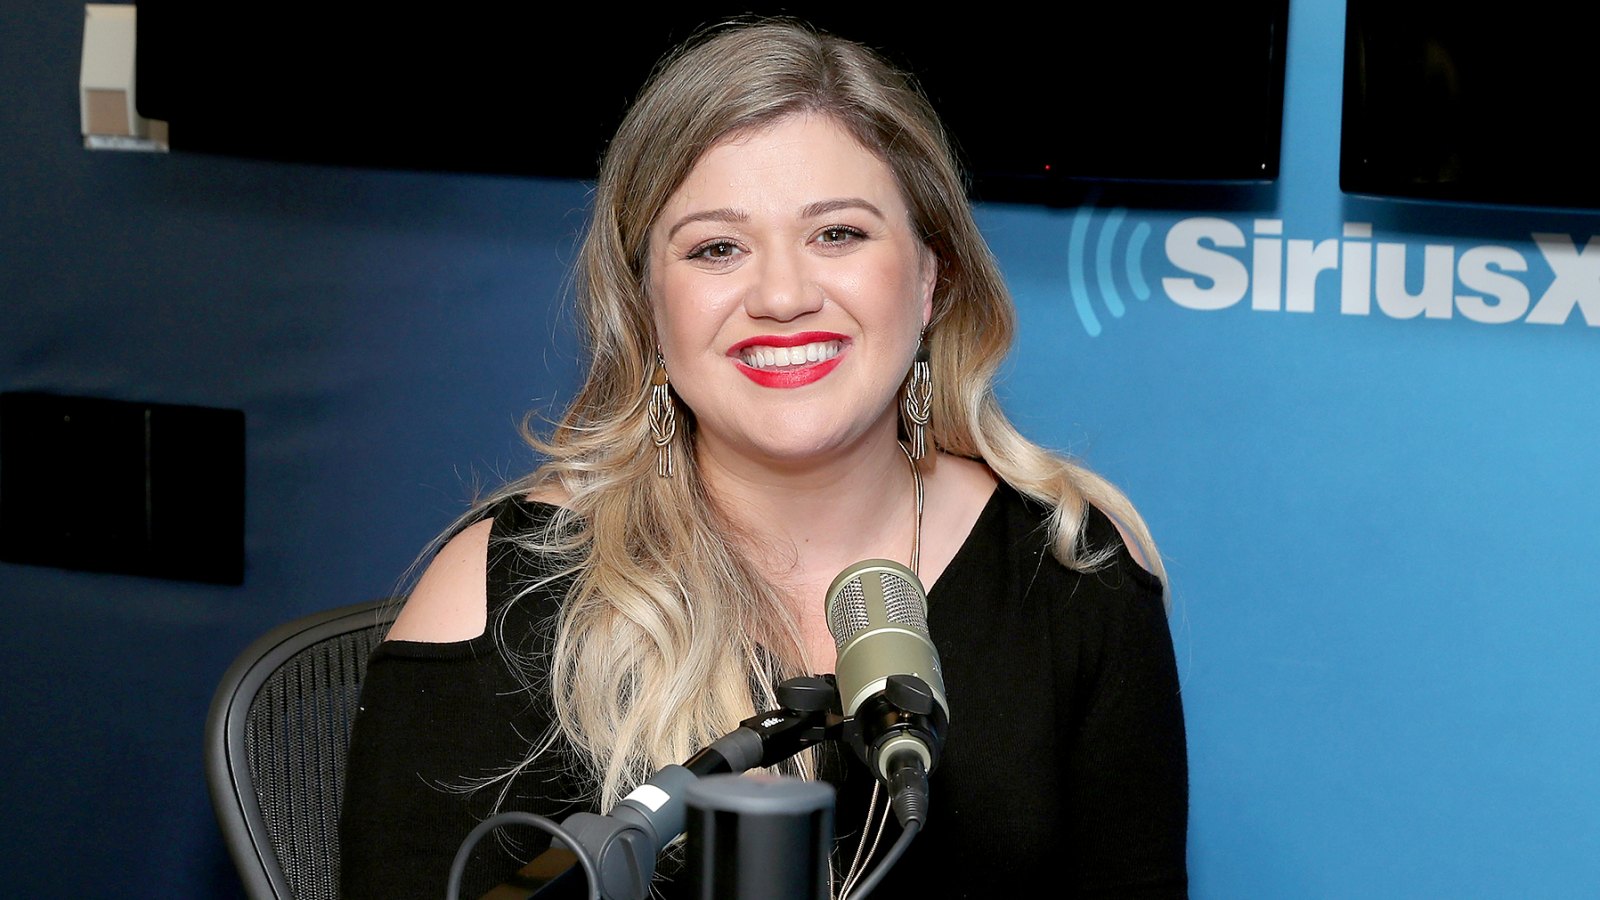 Kelly Clarkson is a guest on "The Hoda Show" on Today Show Radio at SiriusXM Studios on October 5, 2016 in New York City.